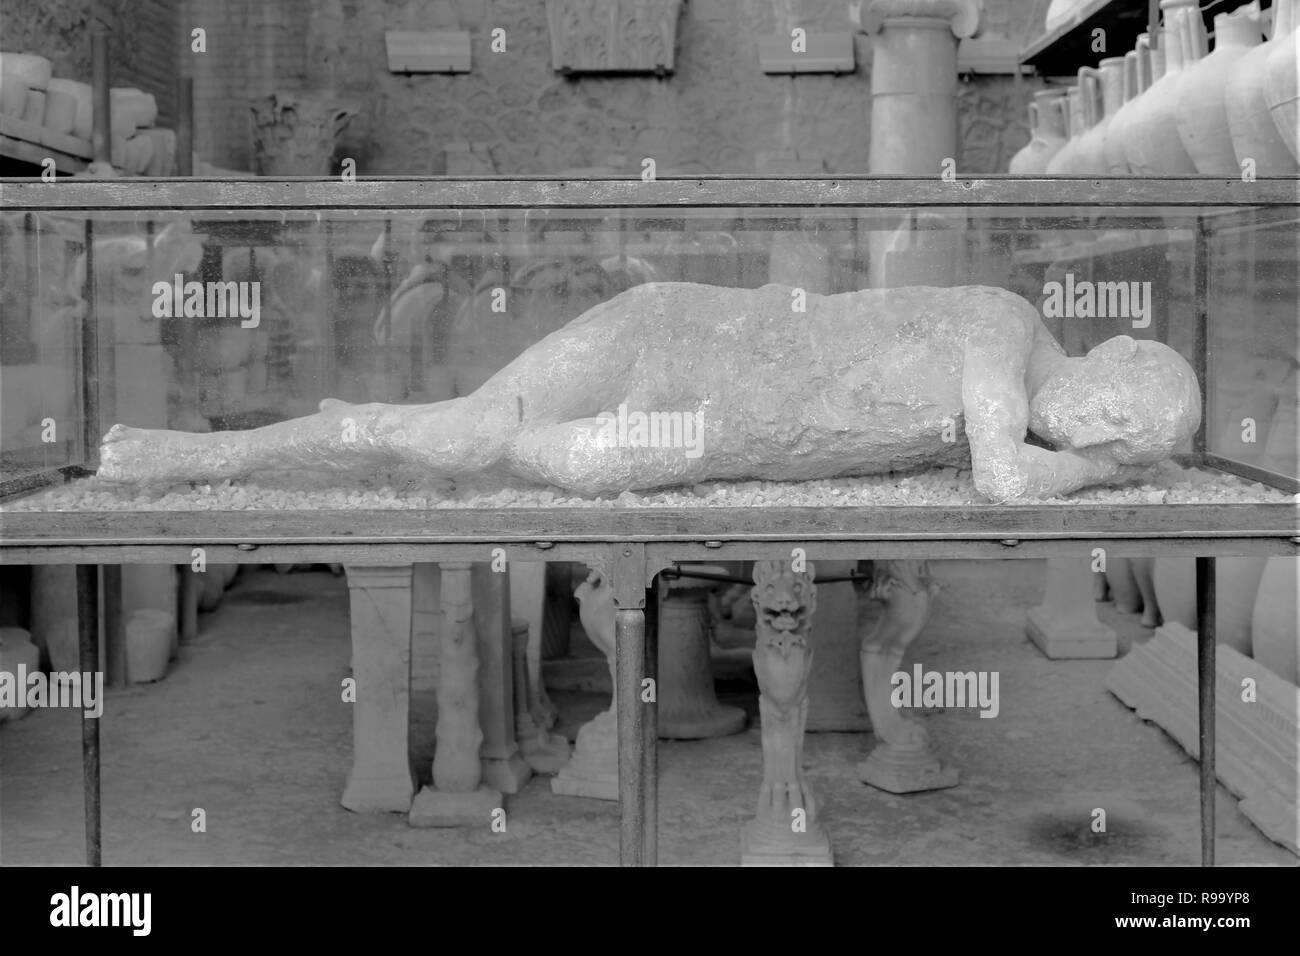 A plaster casting of the remains of a person showing their position at the time of death, at the archaeological site of the ancient city of Pompeii. Stock Photo